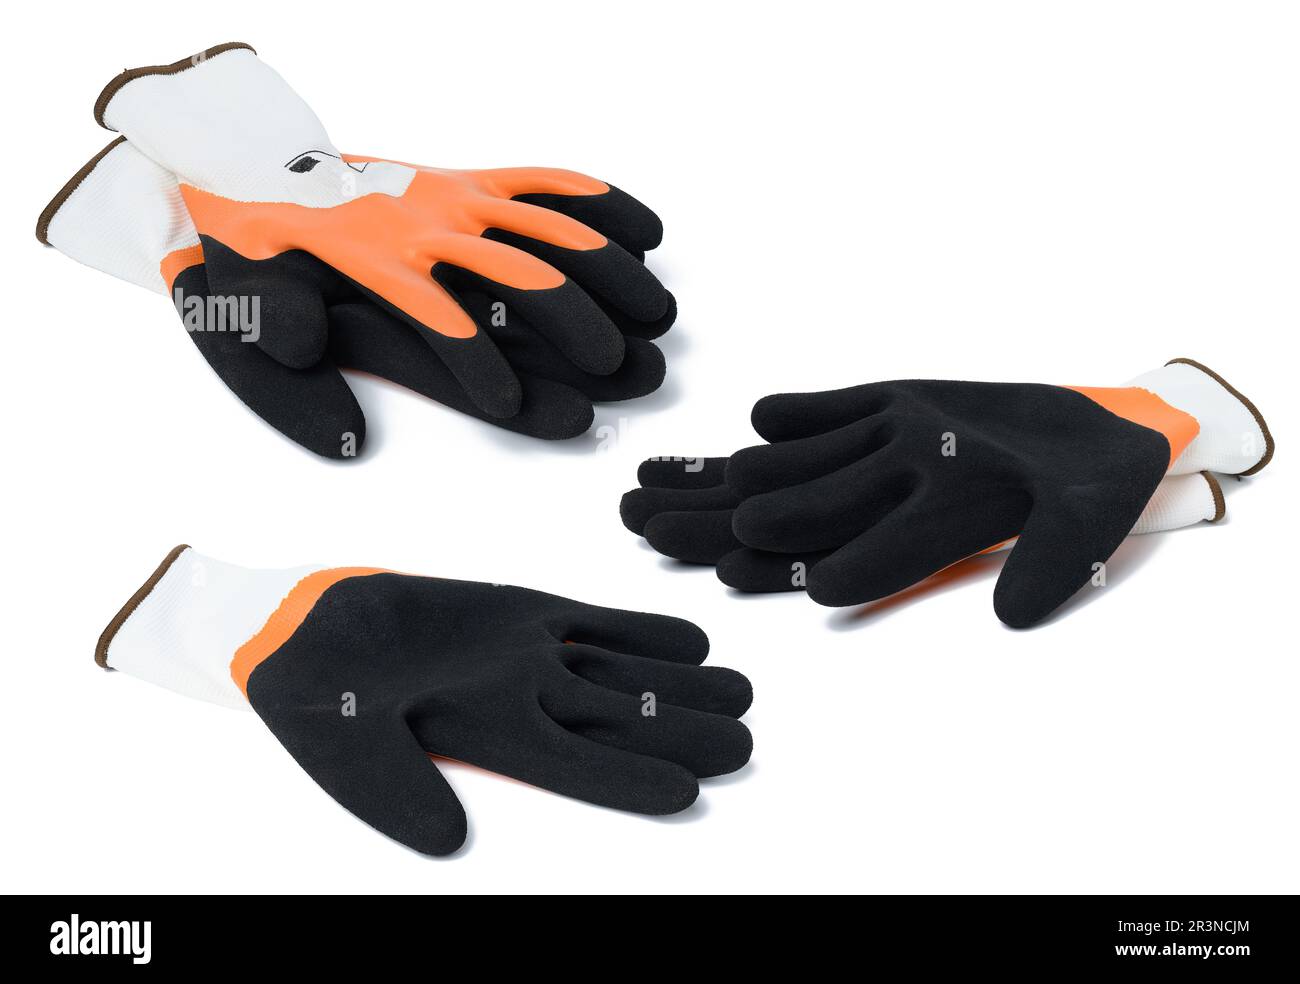 Knitted gloves with latex coating to protect against mechanical damage, grease and oil Stock Photo